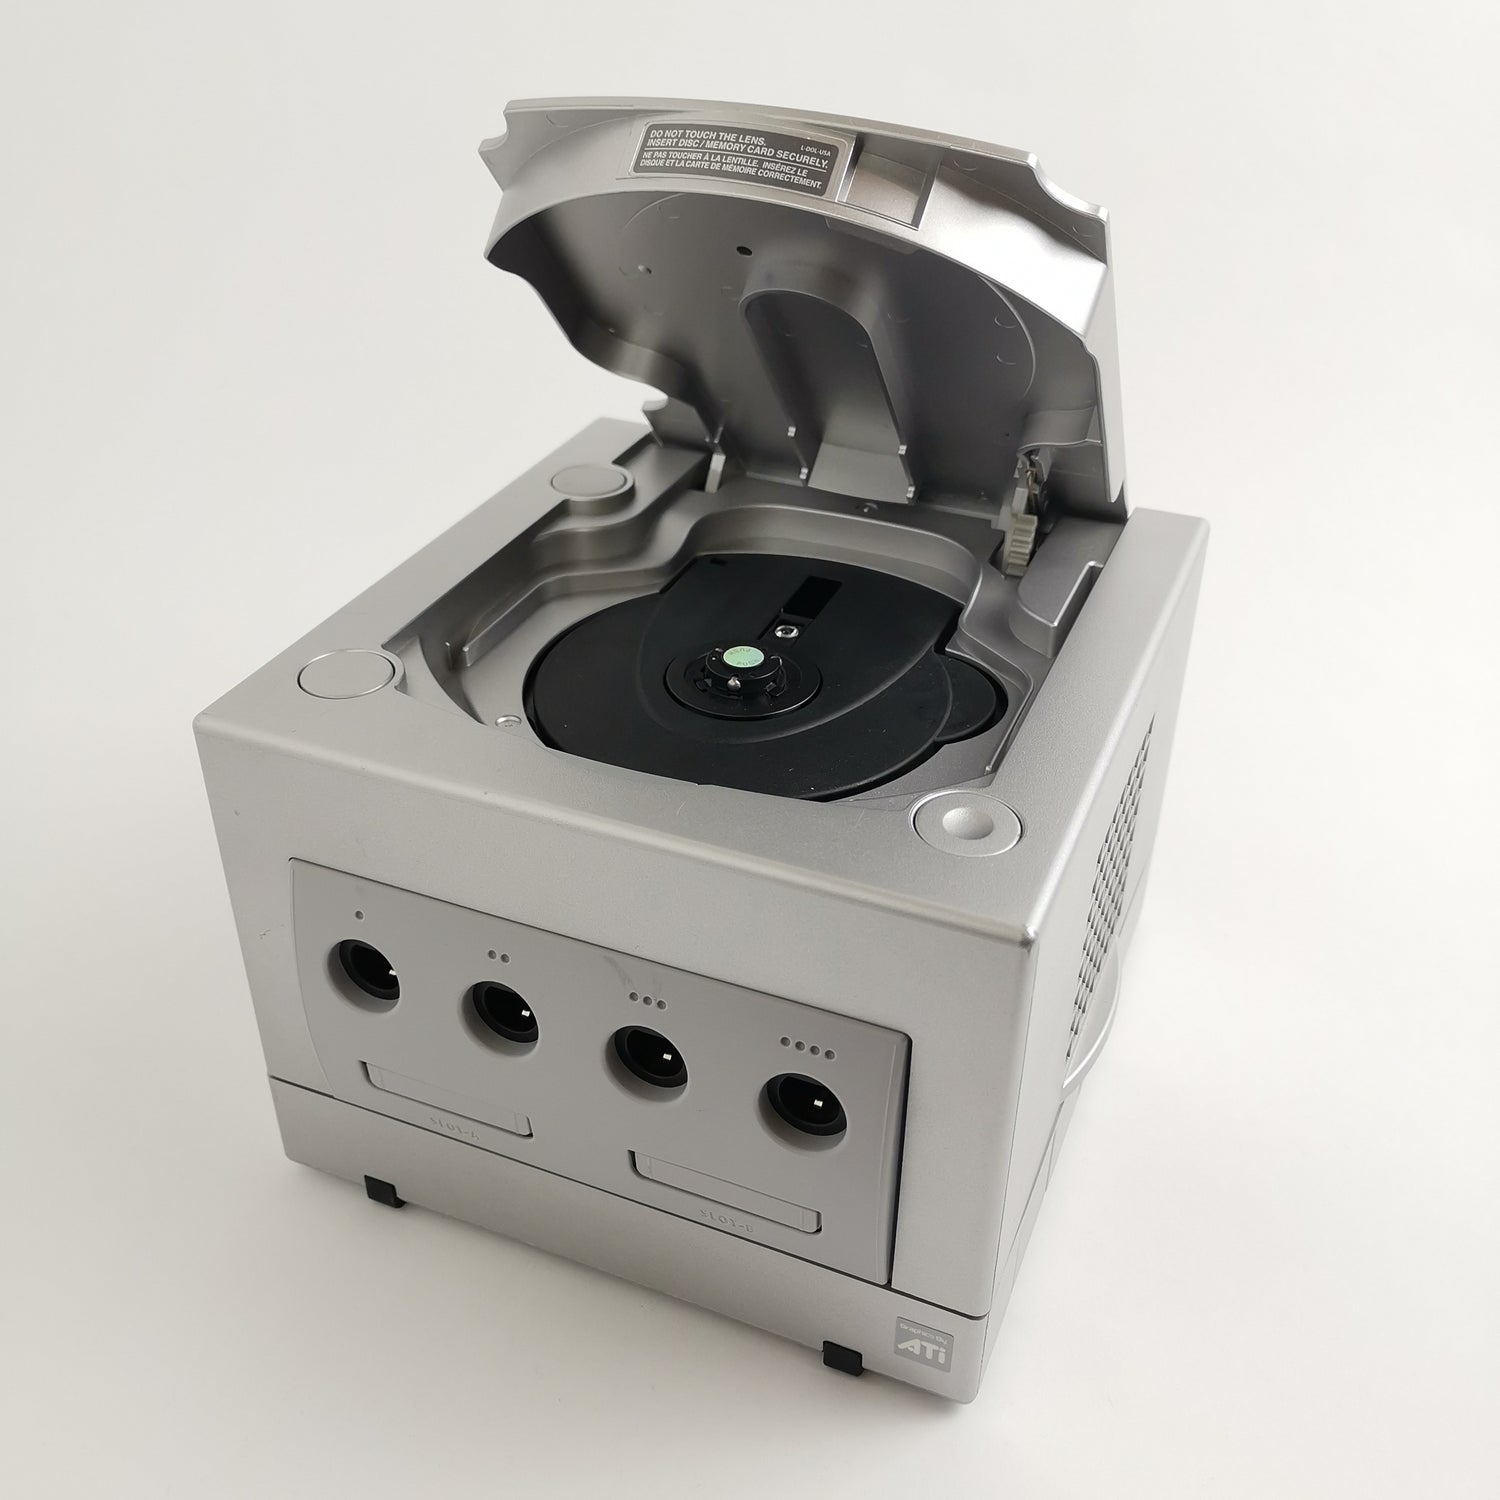 Nintendo Gamecube Console: Platinum Silver / Silver Console with cables and gamepad